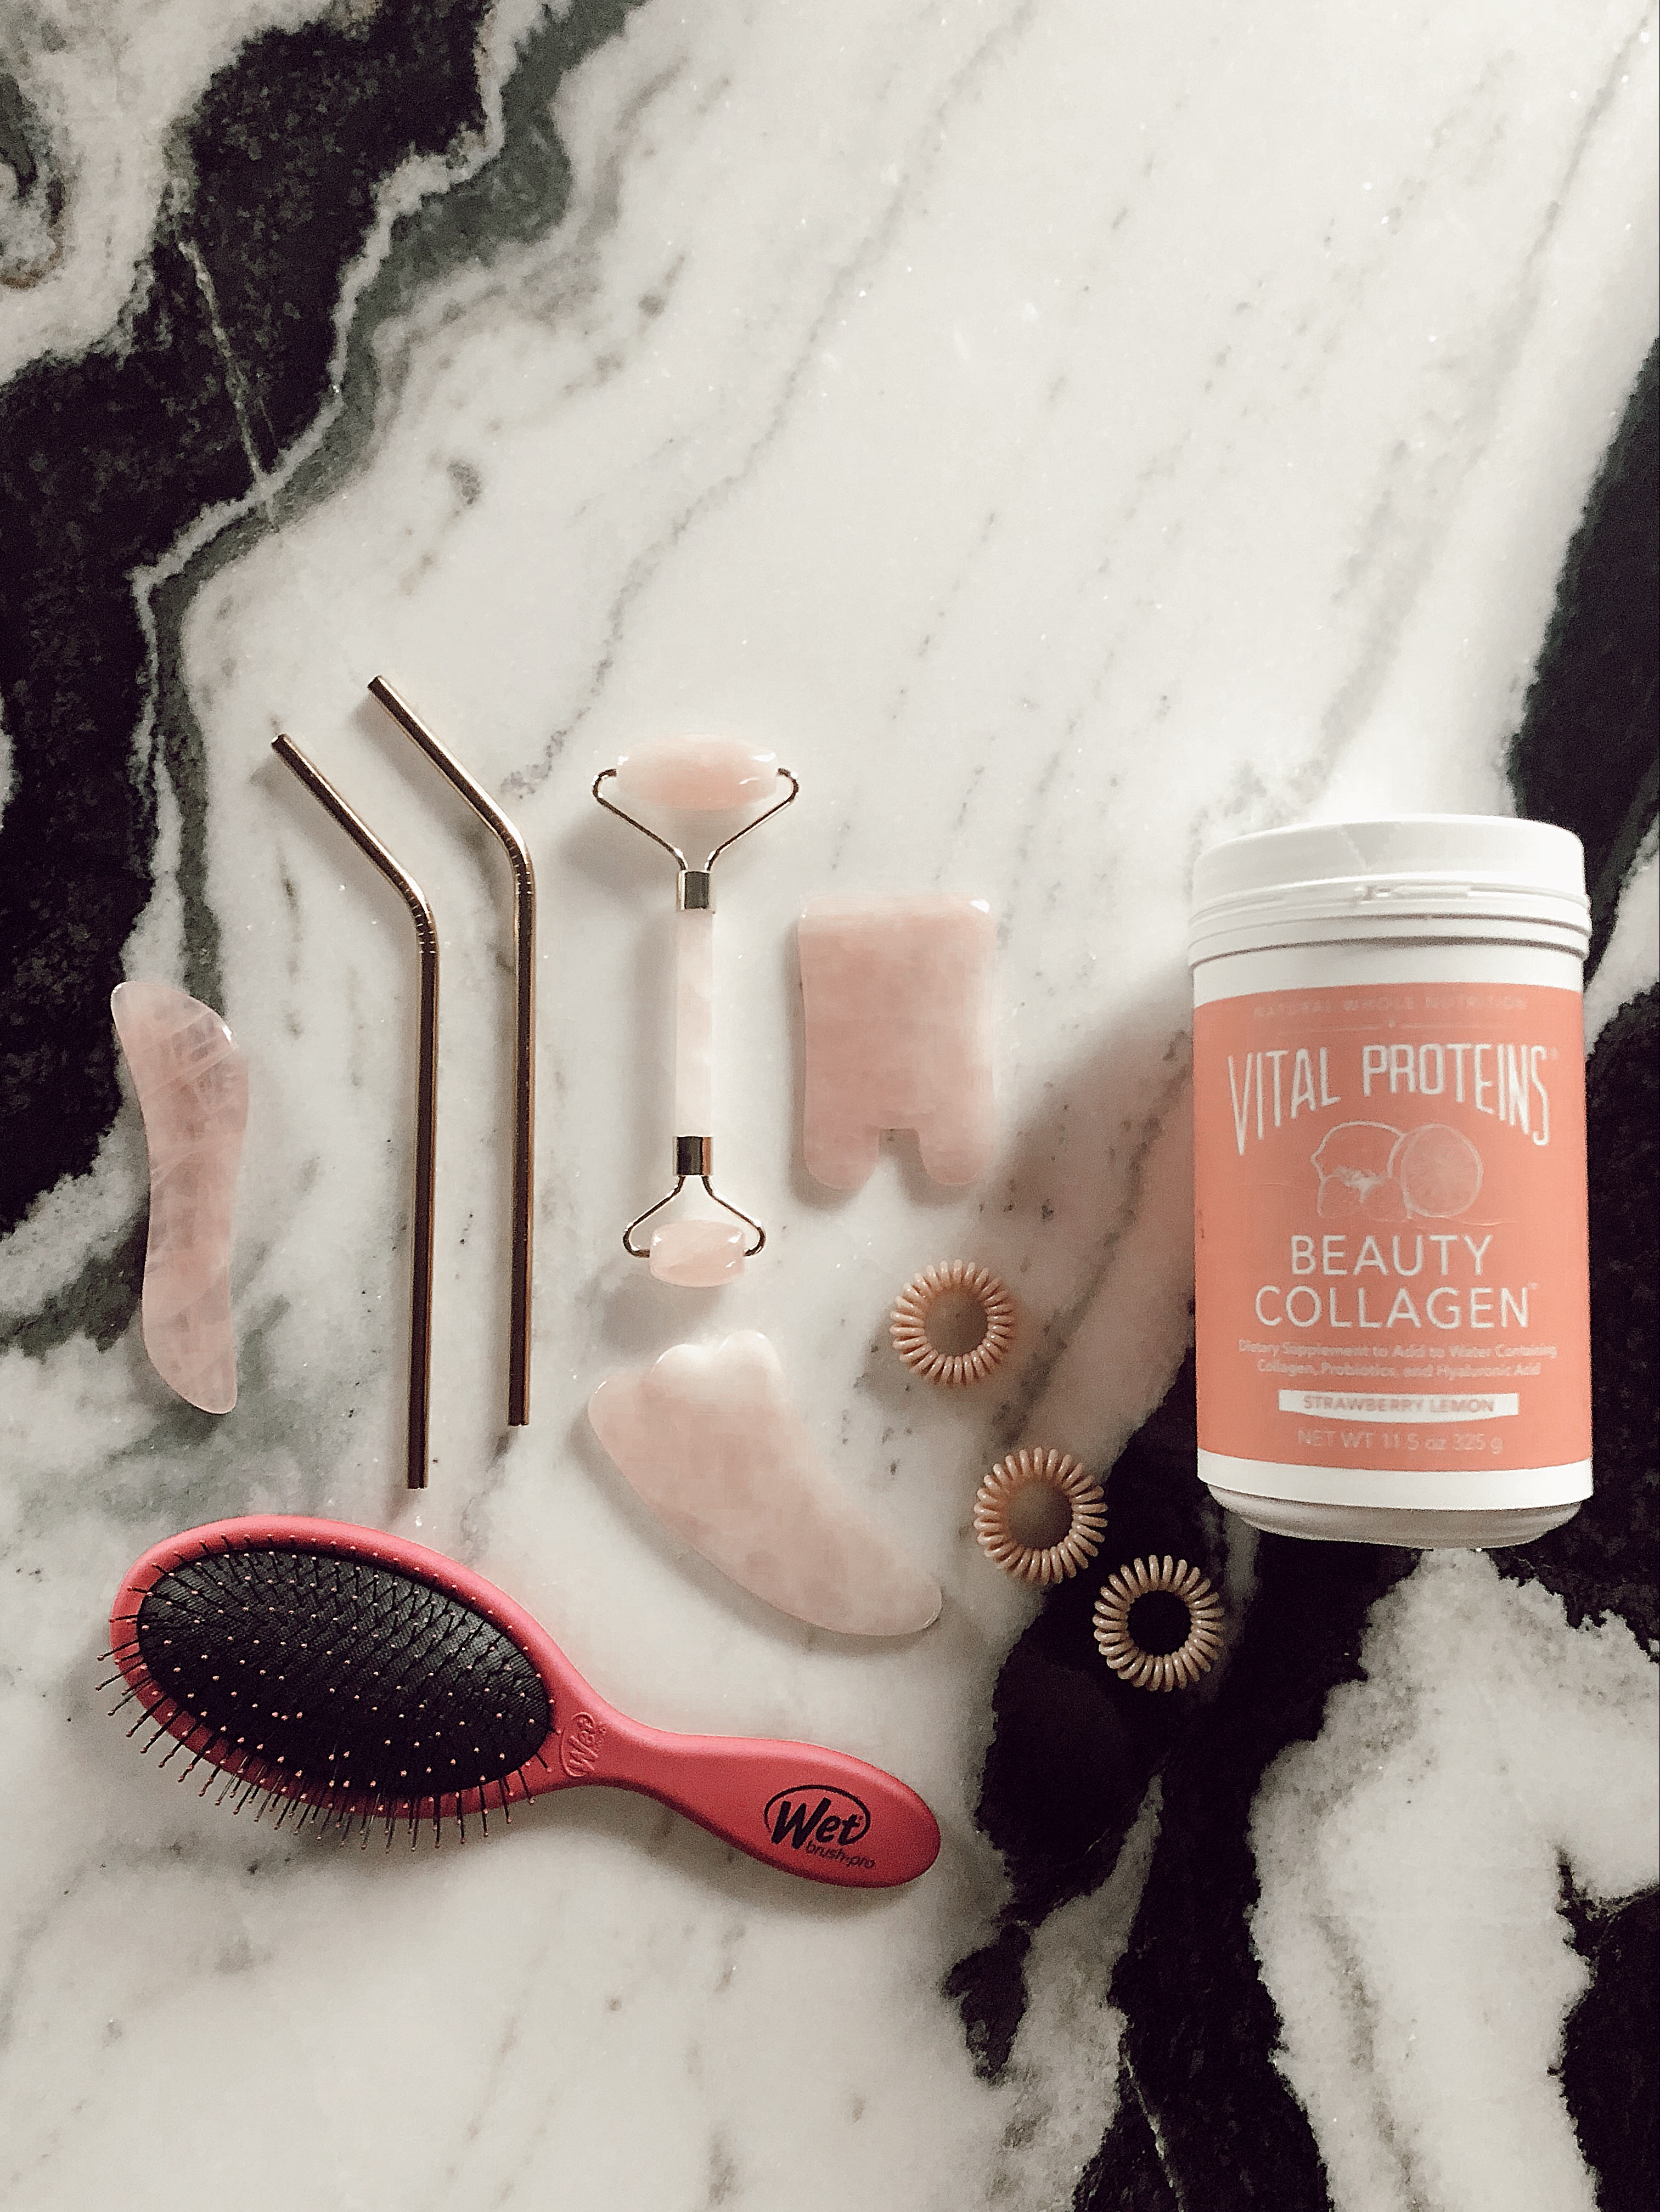 Ashley Zeal from Two Peas in a Prada shares her top Amazon Favorites. Find out which products from Amazon she can't live without! 